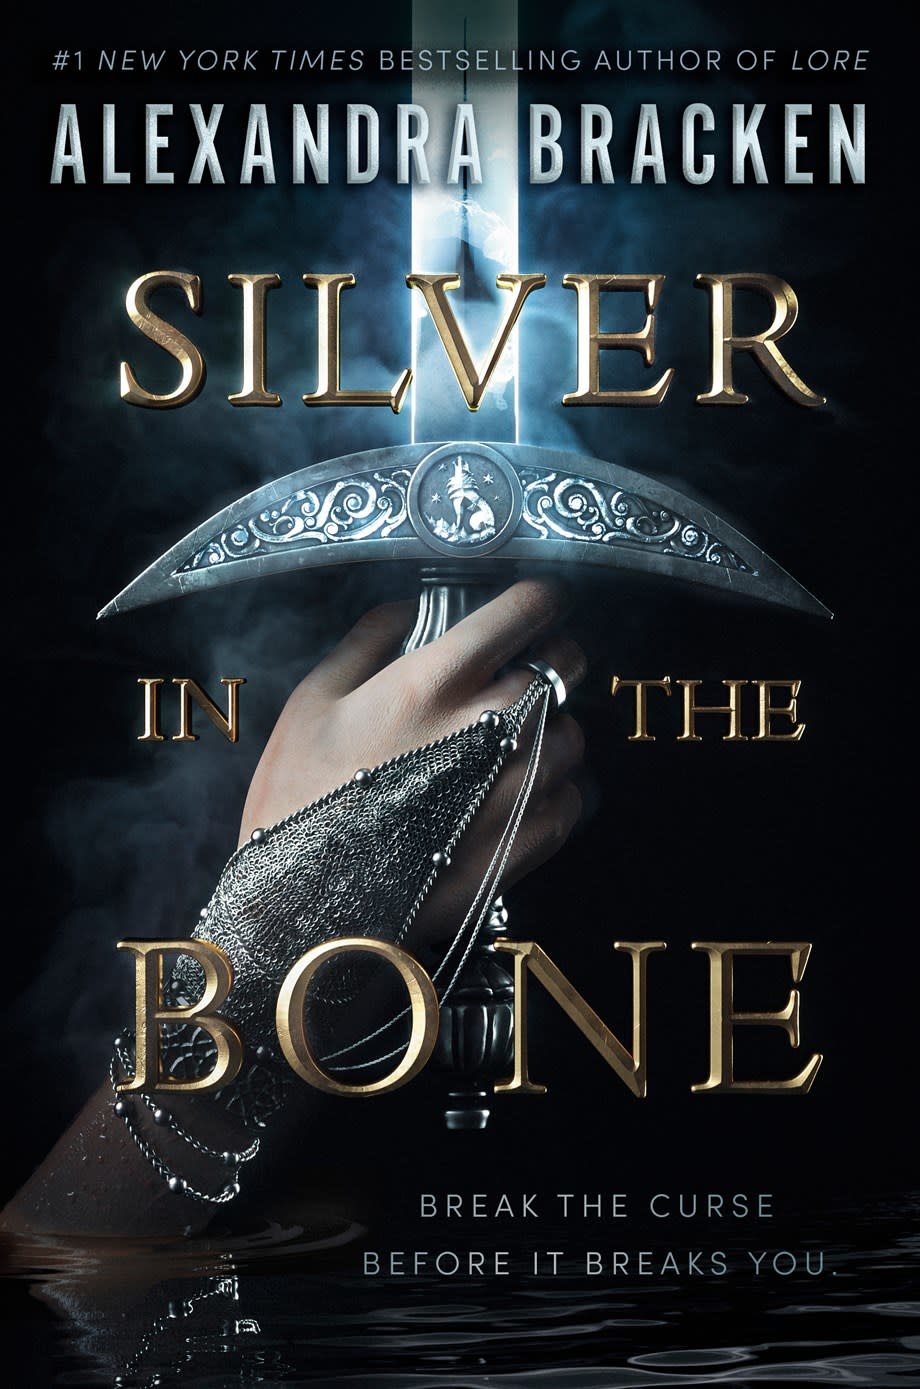 Knopf Books for Young Readers Silver in the Bone